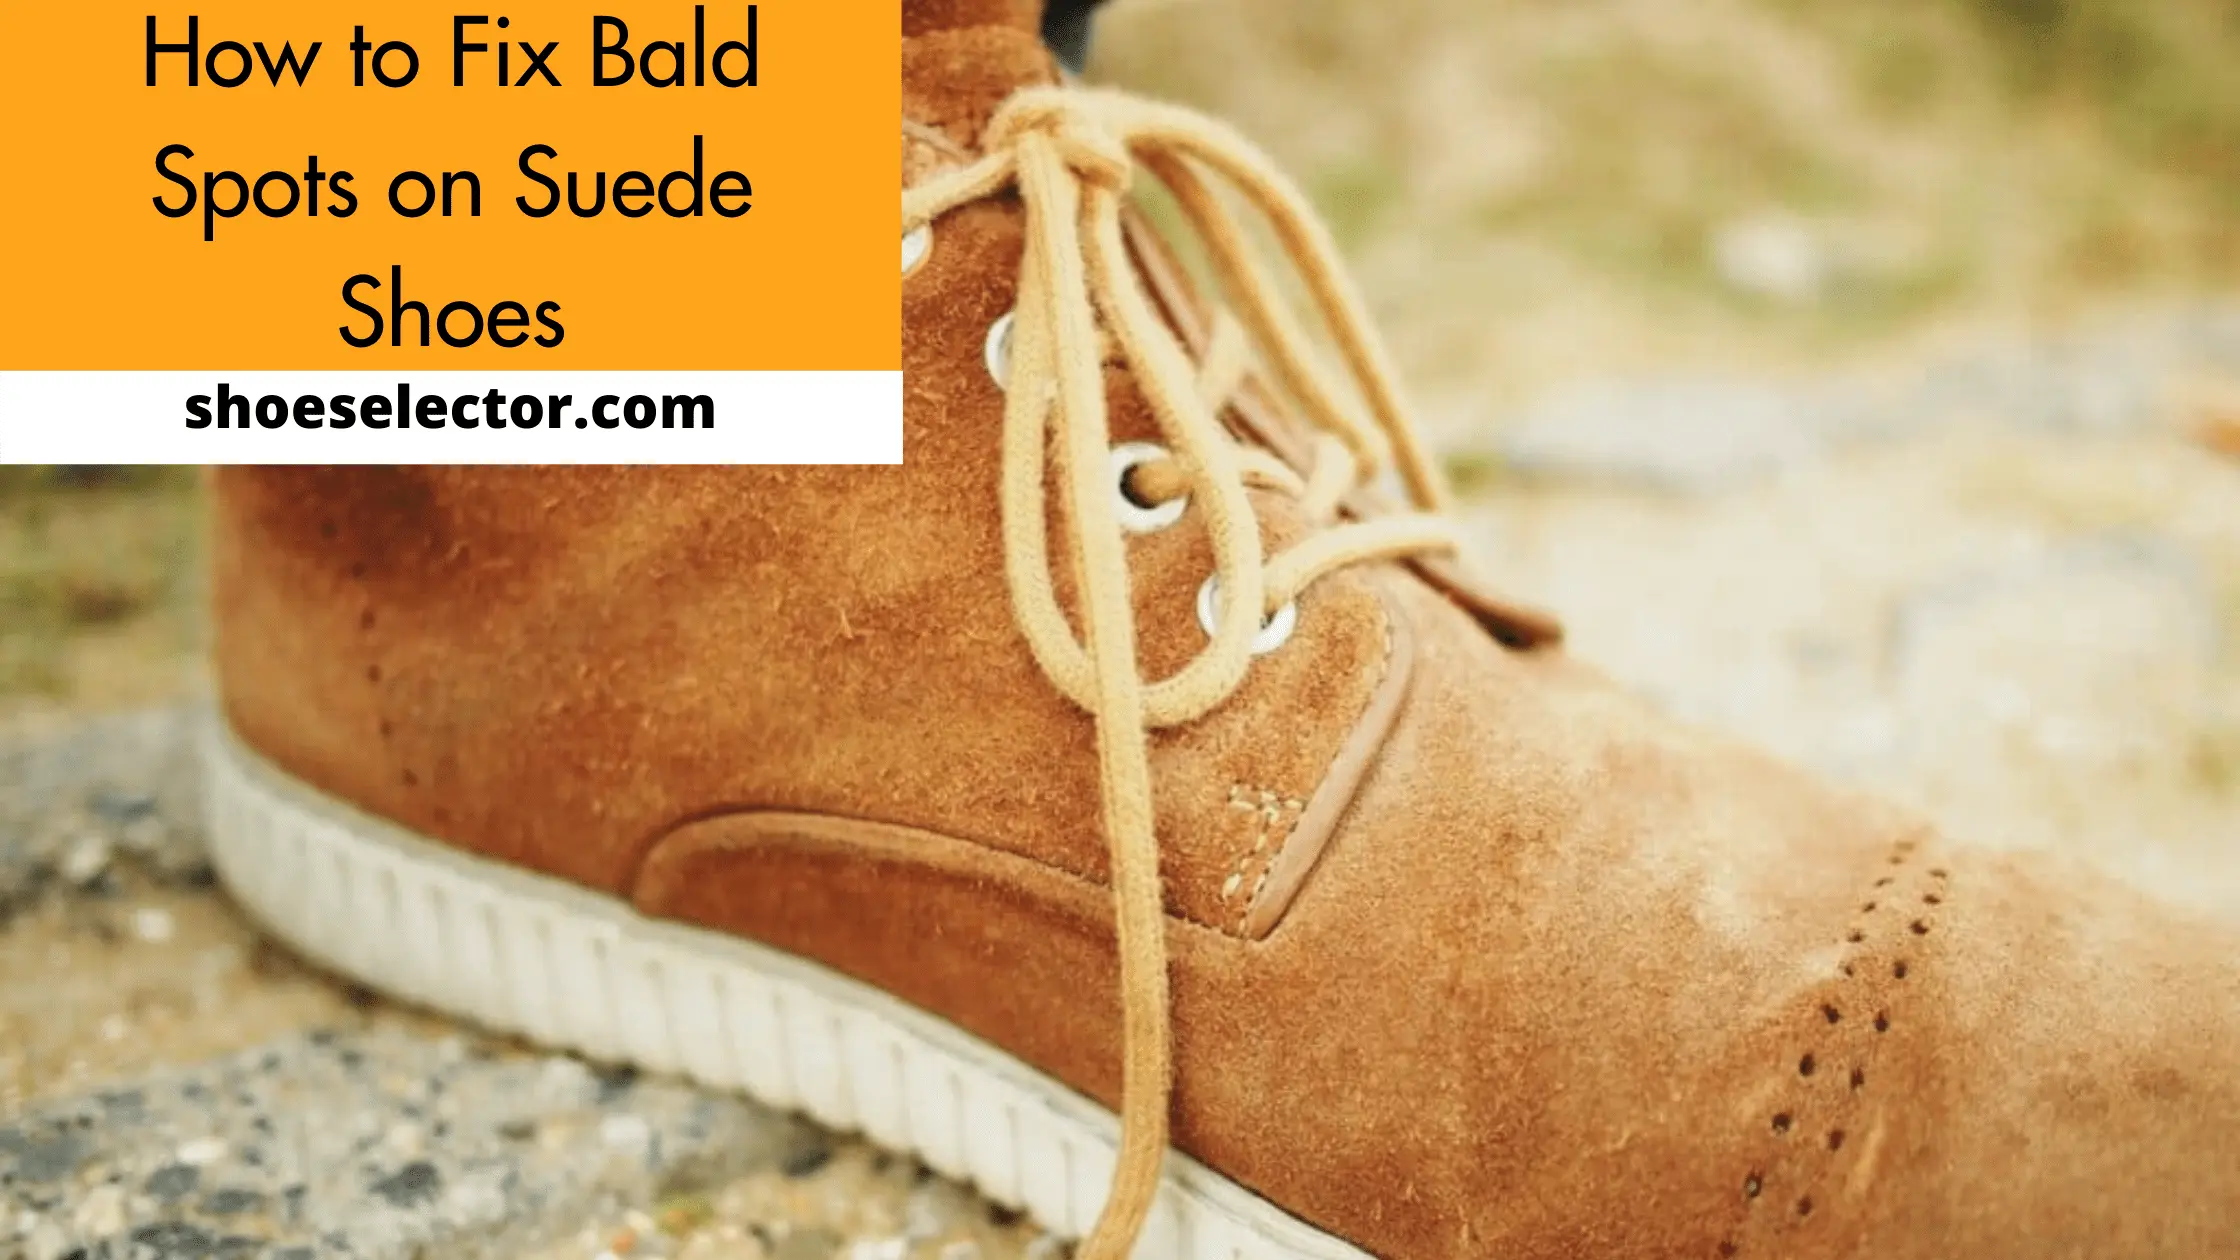 How to Fix Bald Spots on Suede Shoes ? - Complete Guide